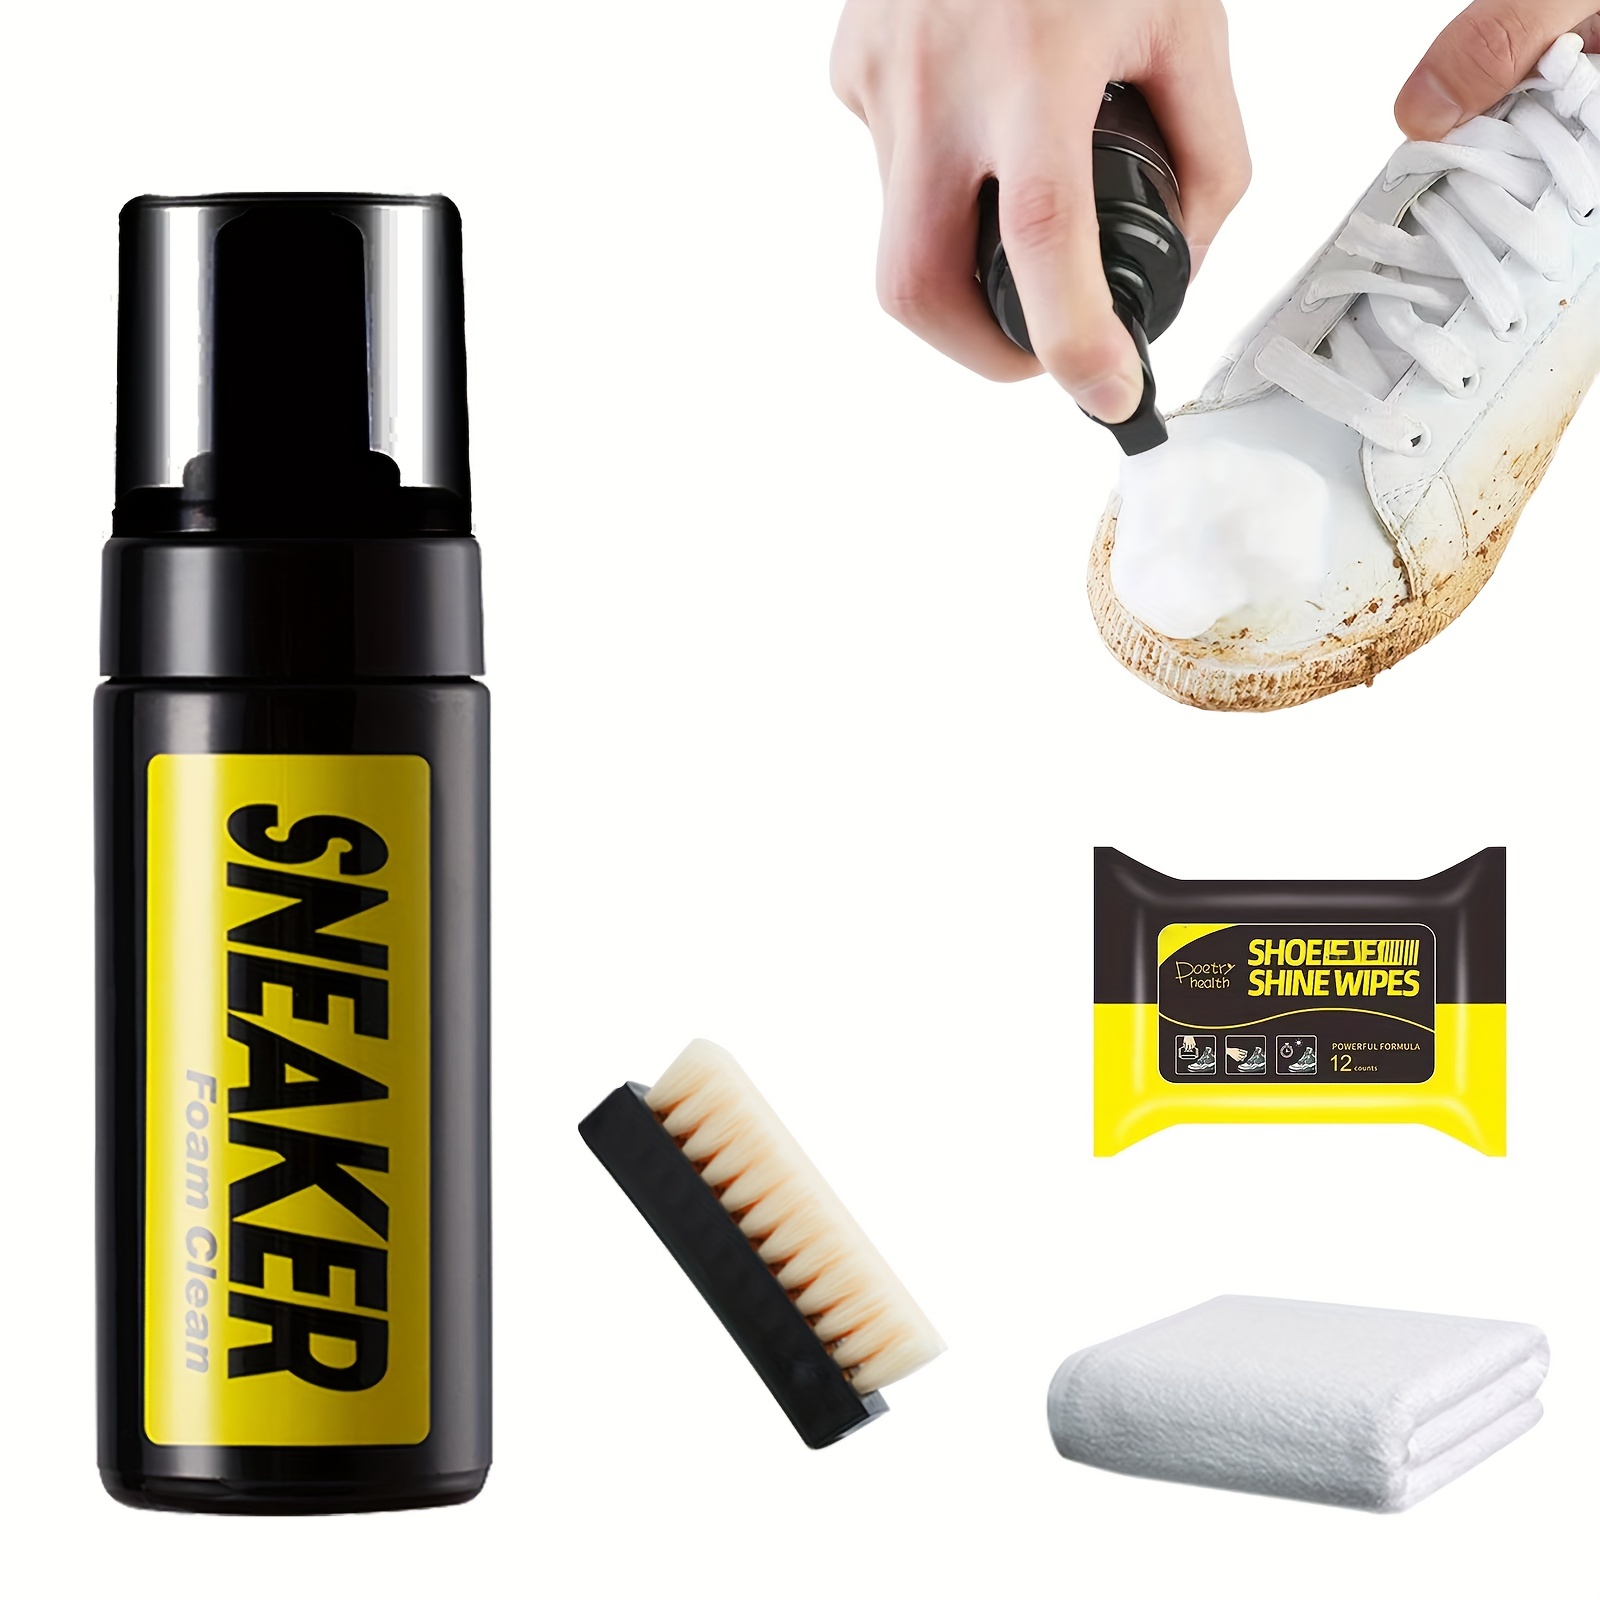 200ml White Shoe Cleaner Portable Clean Shoe Cleaning Foam Suede Sheepskin  Matte Shoes Leather Cleaner Sneakers